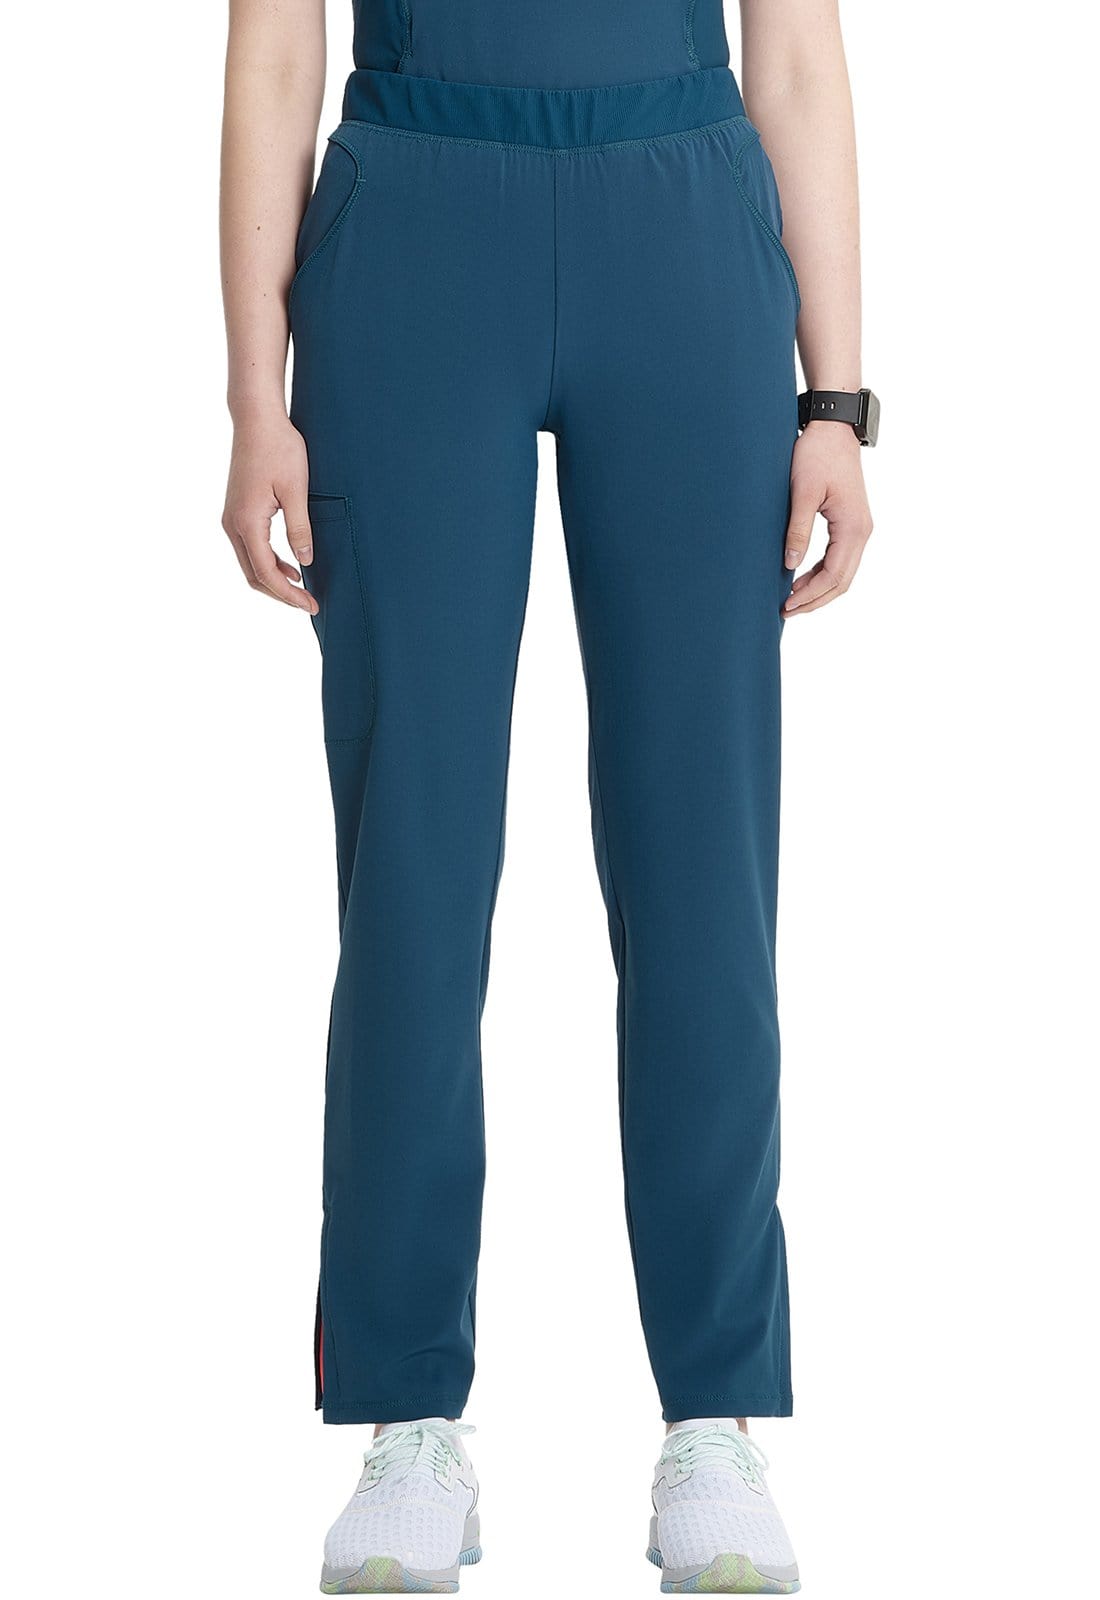 Infinity Infinity GNR8 Caribbean Blue / XXS Infinity GNR8  Mid-rise Tapered Leg Pant IN120A